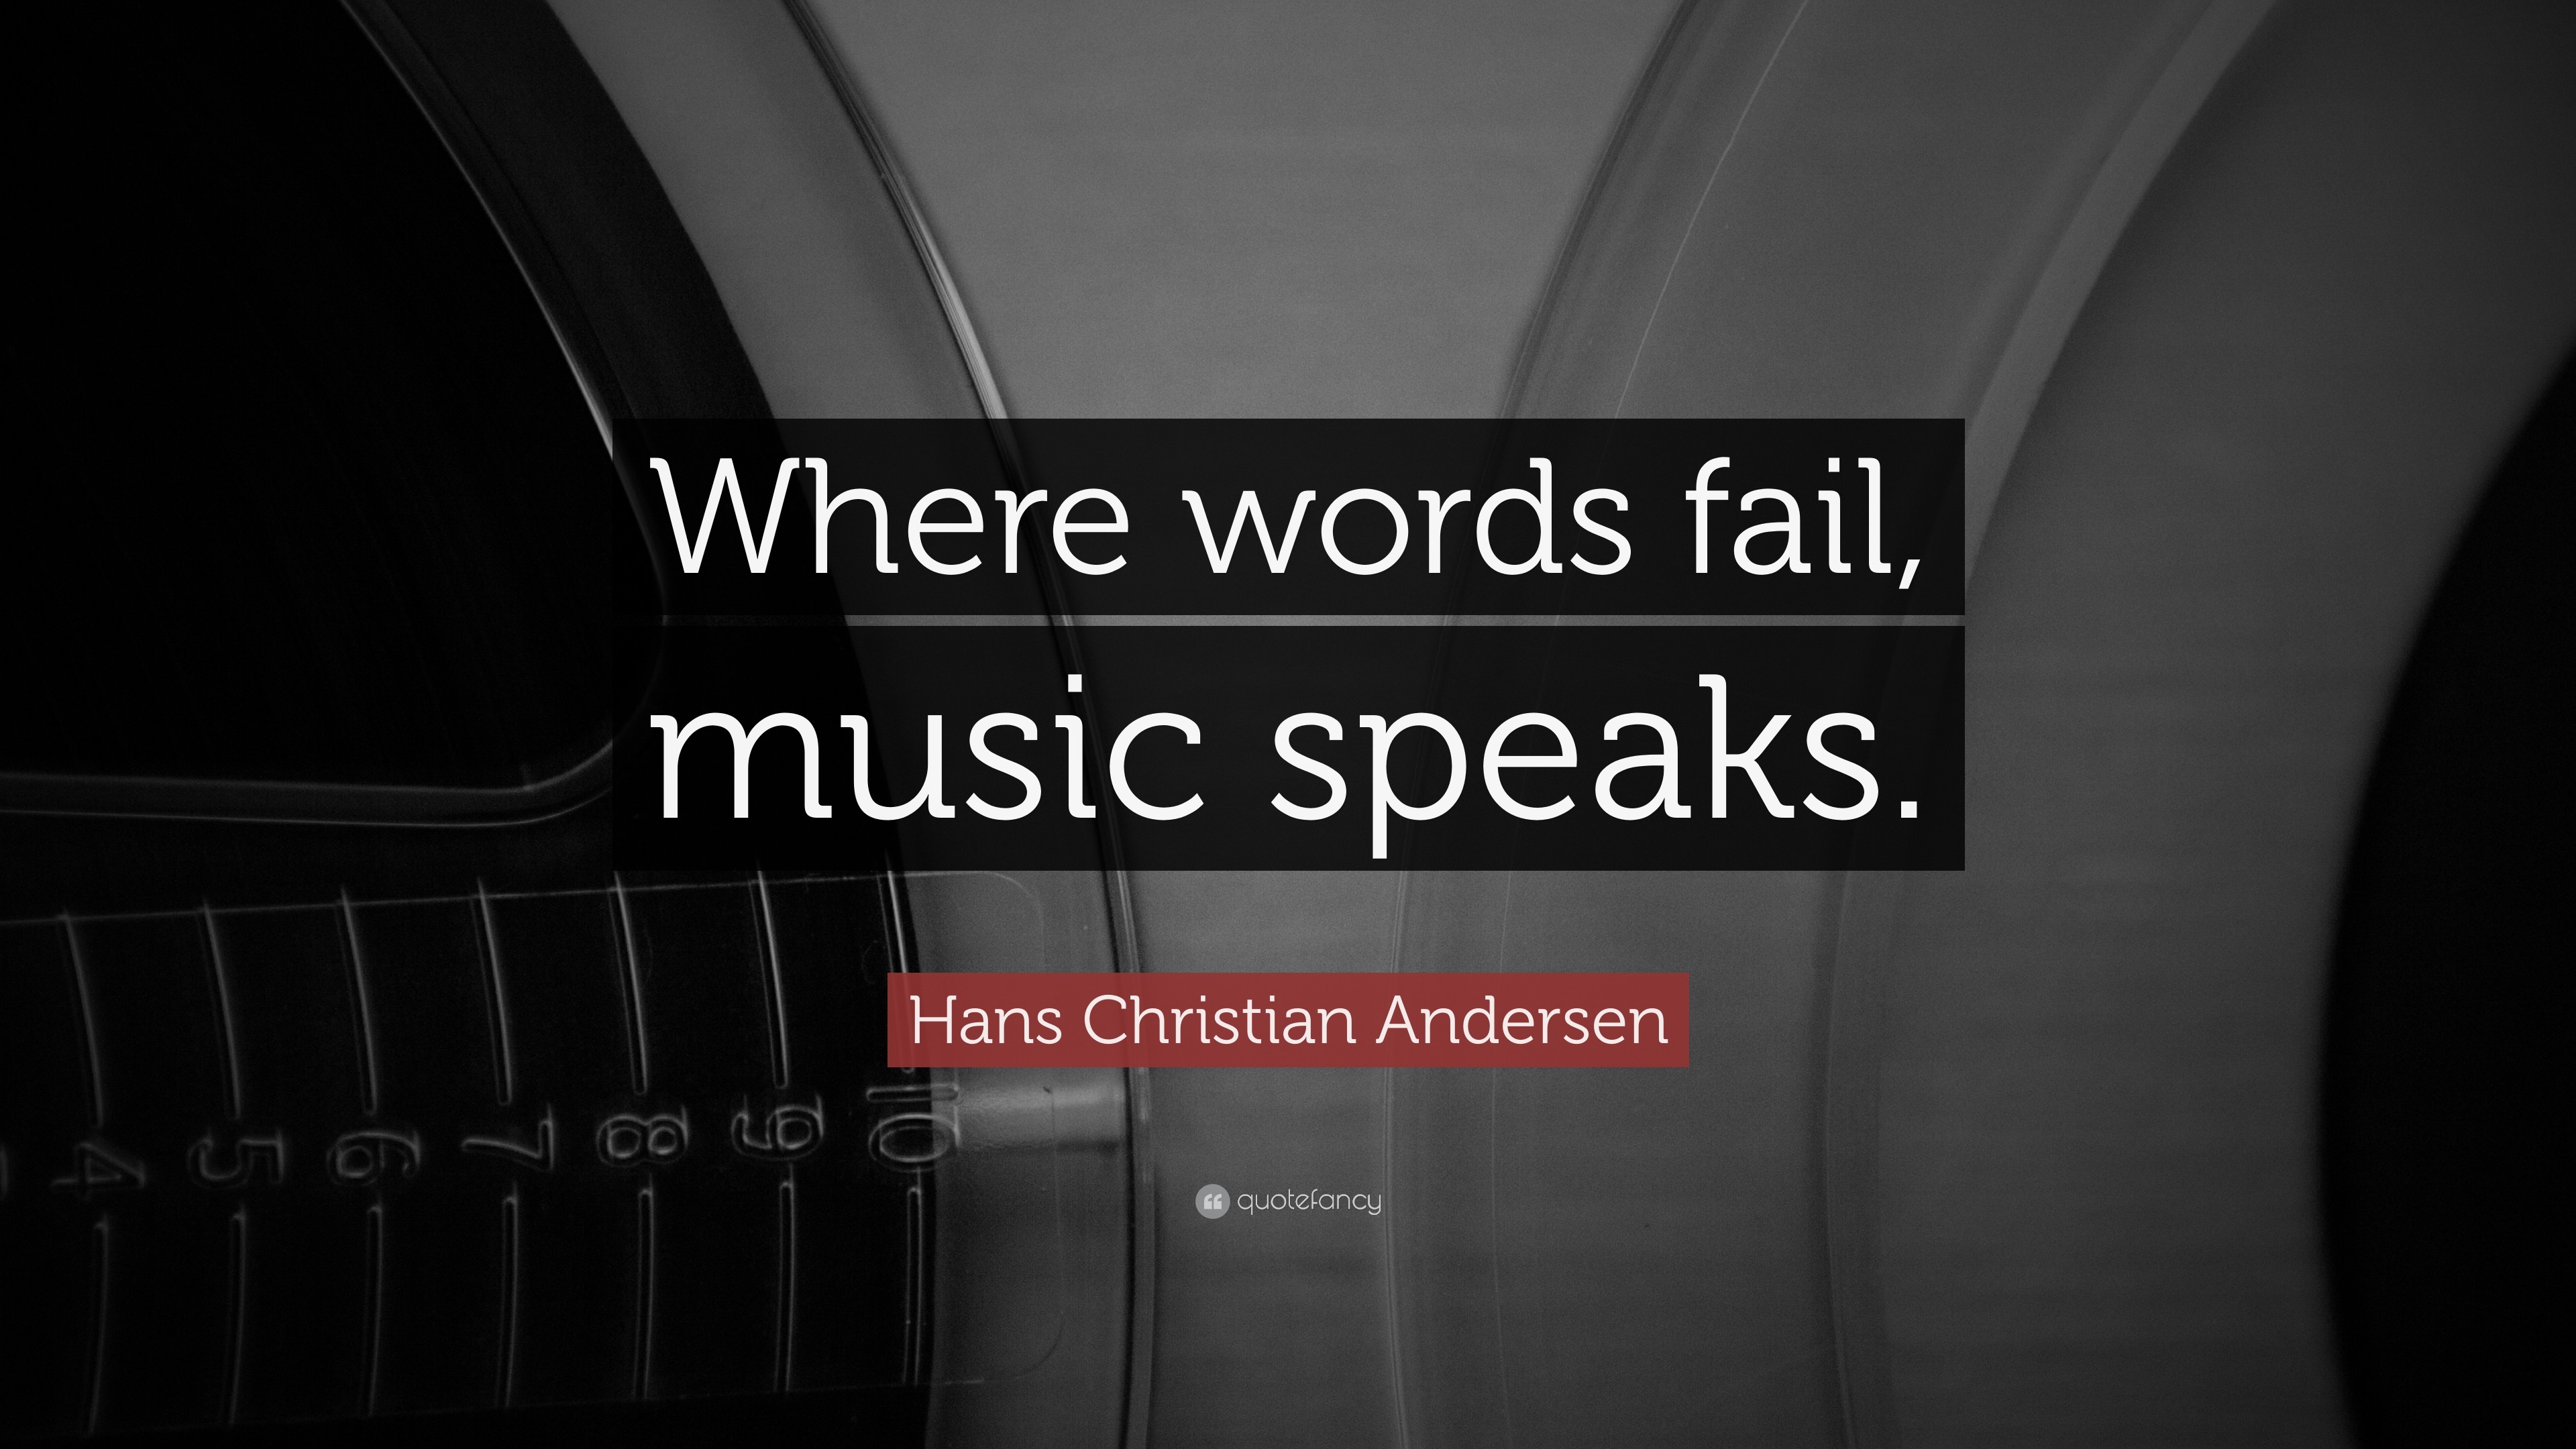 Hans Christian Andersen Quote Where words fail, music speaks.